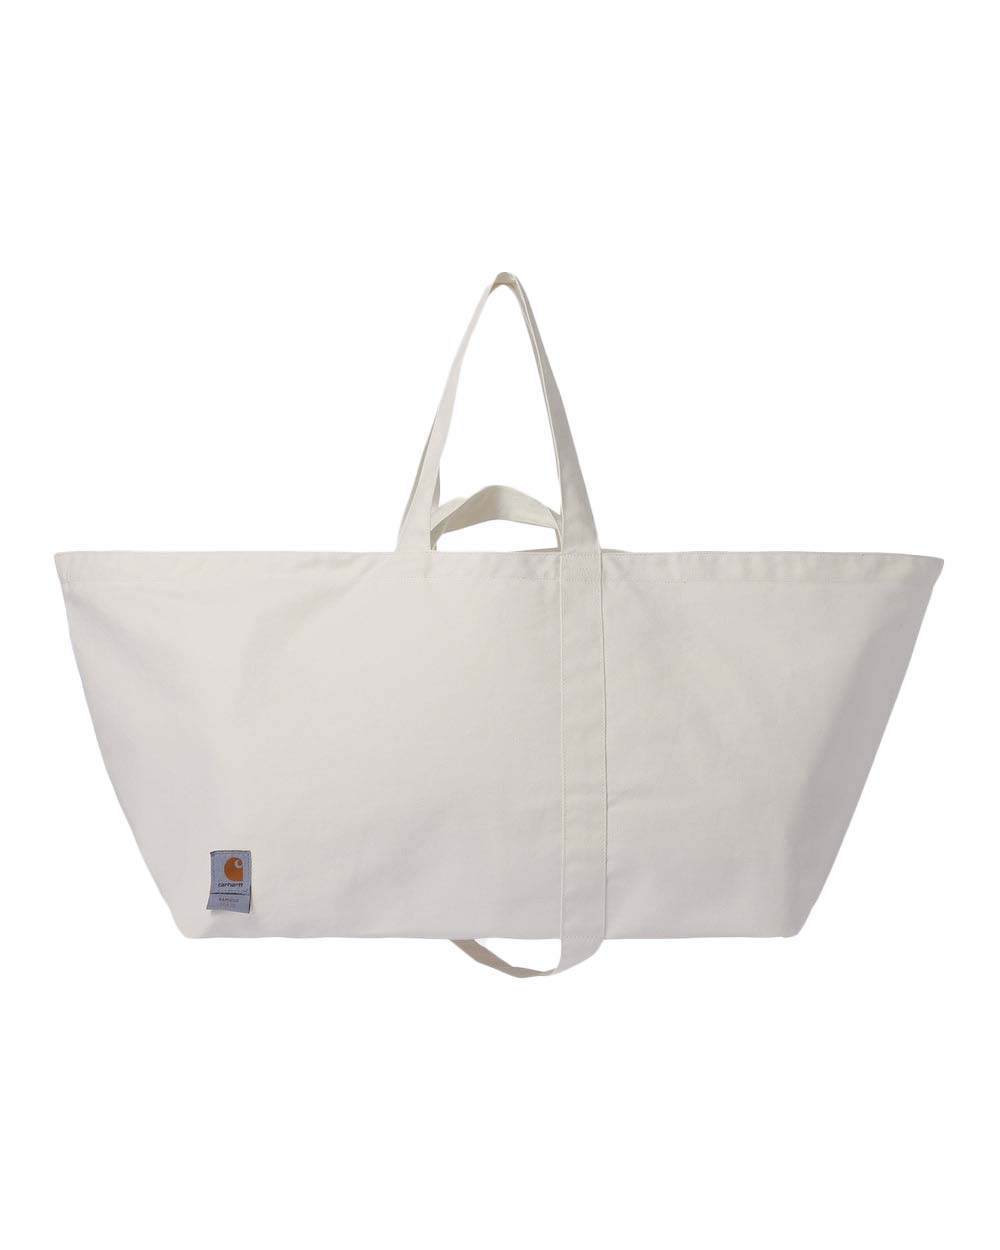 Carhartt WIP x RAMIDUS Tote Bag XL WIP White in Cotton - US